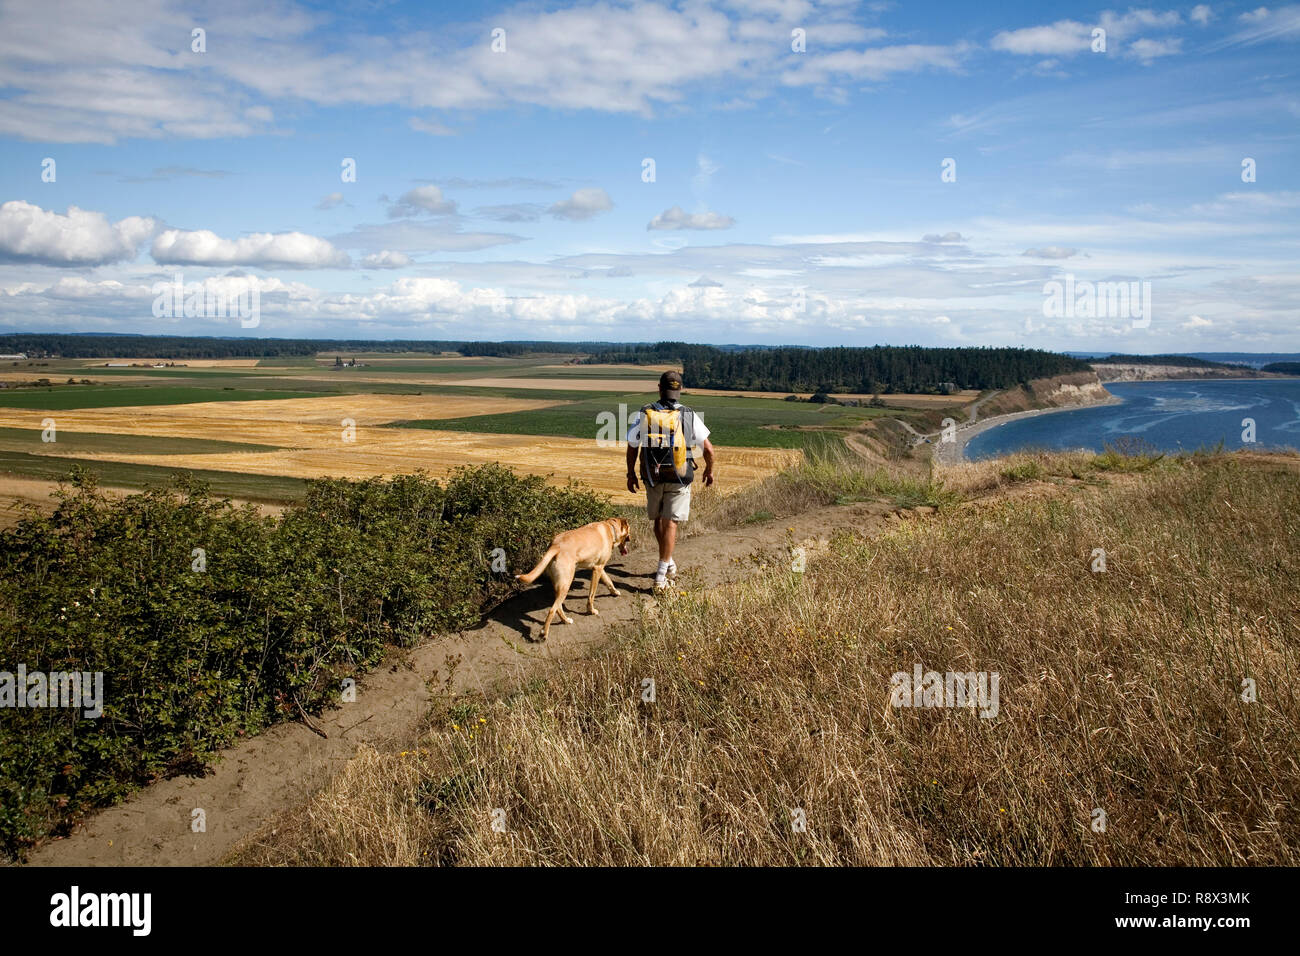 WA03558-00....WASHINGTON - Hiker with a dog on the Perego's Bluff Trail part of Nature Conservancy Land along the Strait of Juan de Fuca. Stock Photo